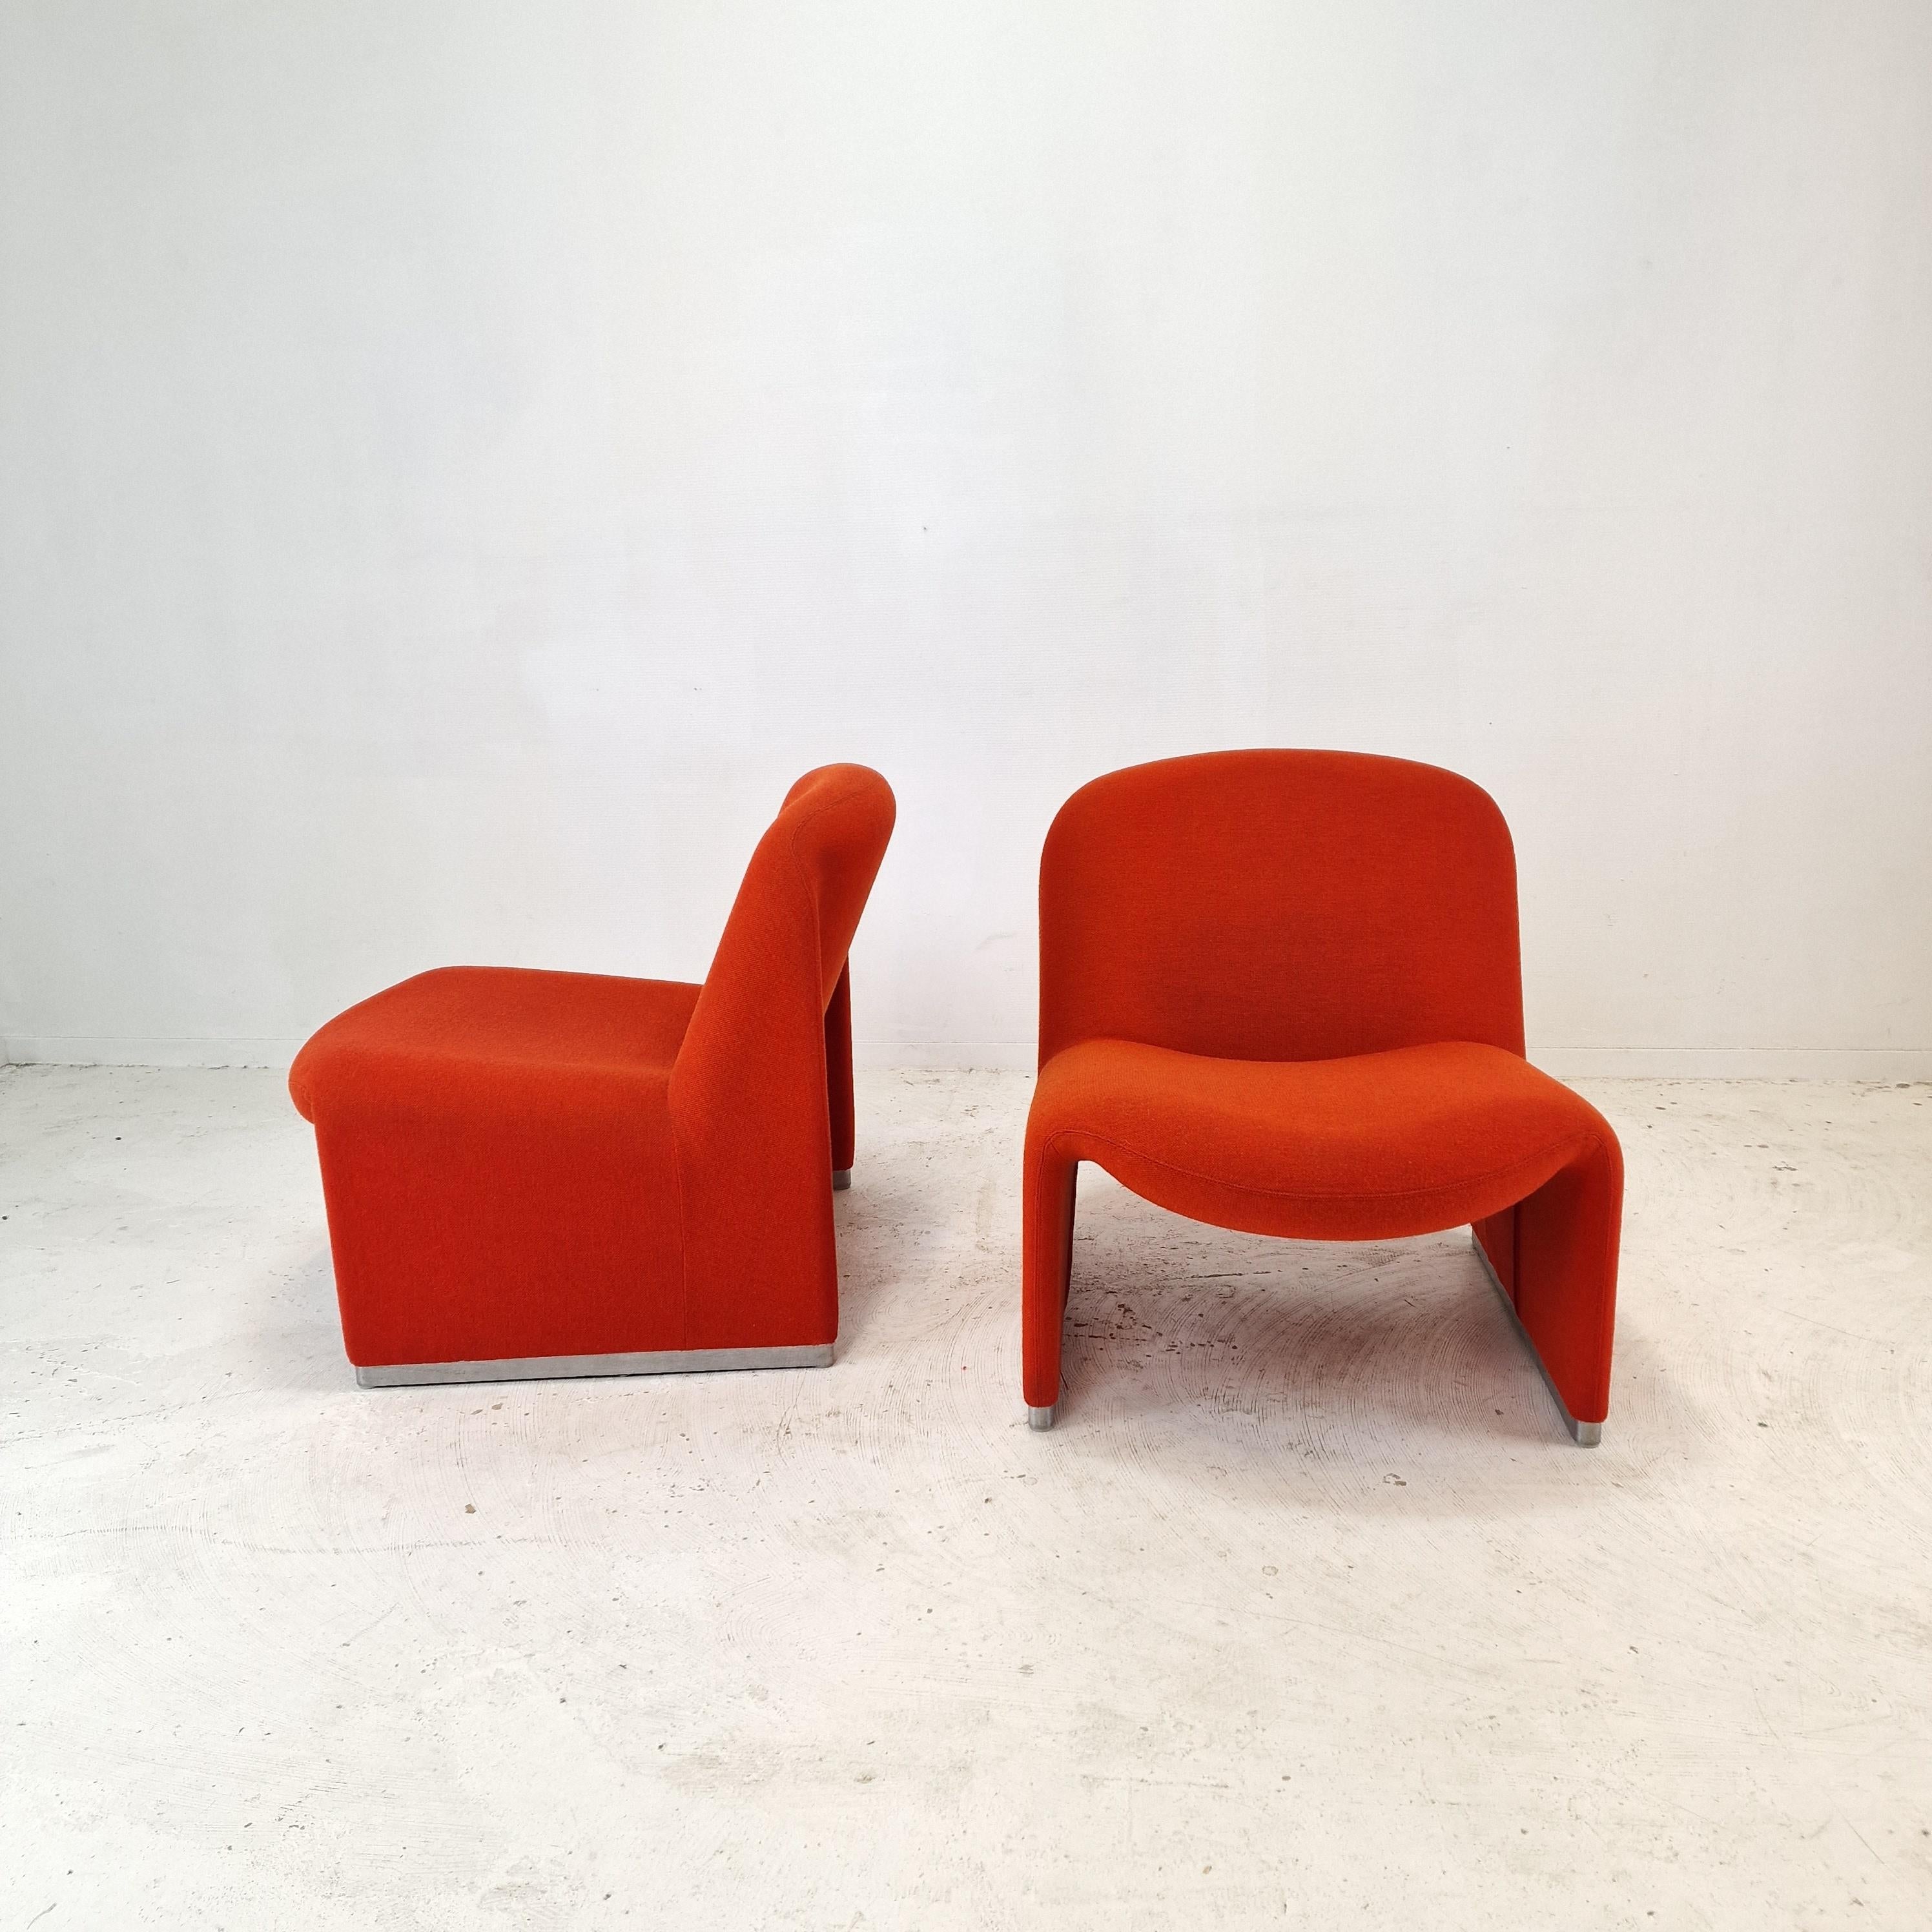 Lovely and comfortable Alky chair. 
Designed by Giancarlo Piretti in 1969, produced by Castelli Italy. 

Both chairs have the original wool fabric, color red.
The chairs are professionally cleaned, the fabric is in good condition.

The price is for